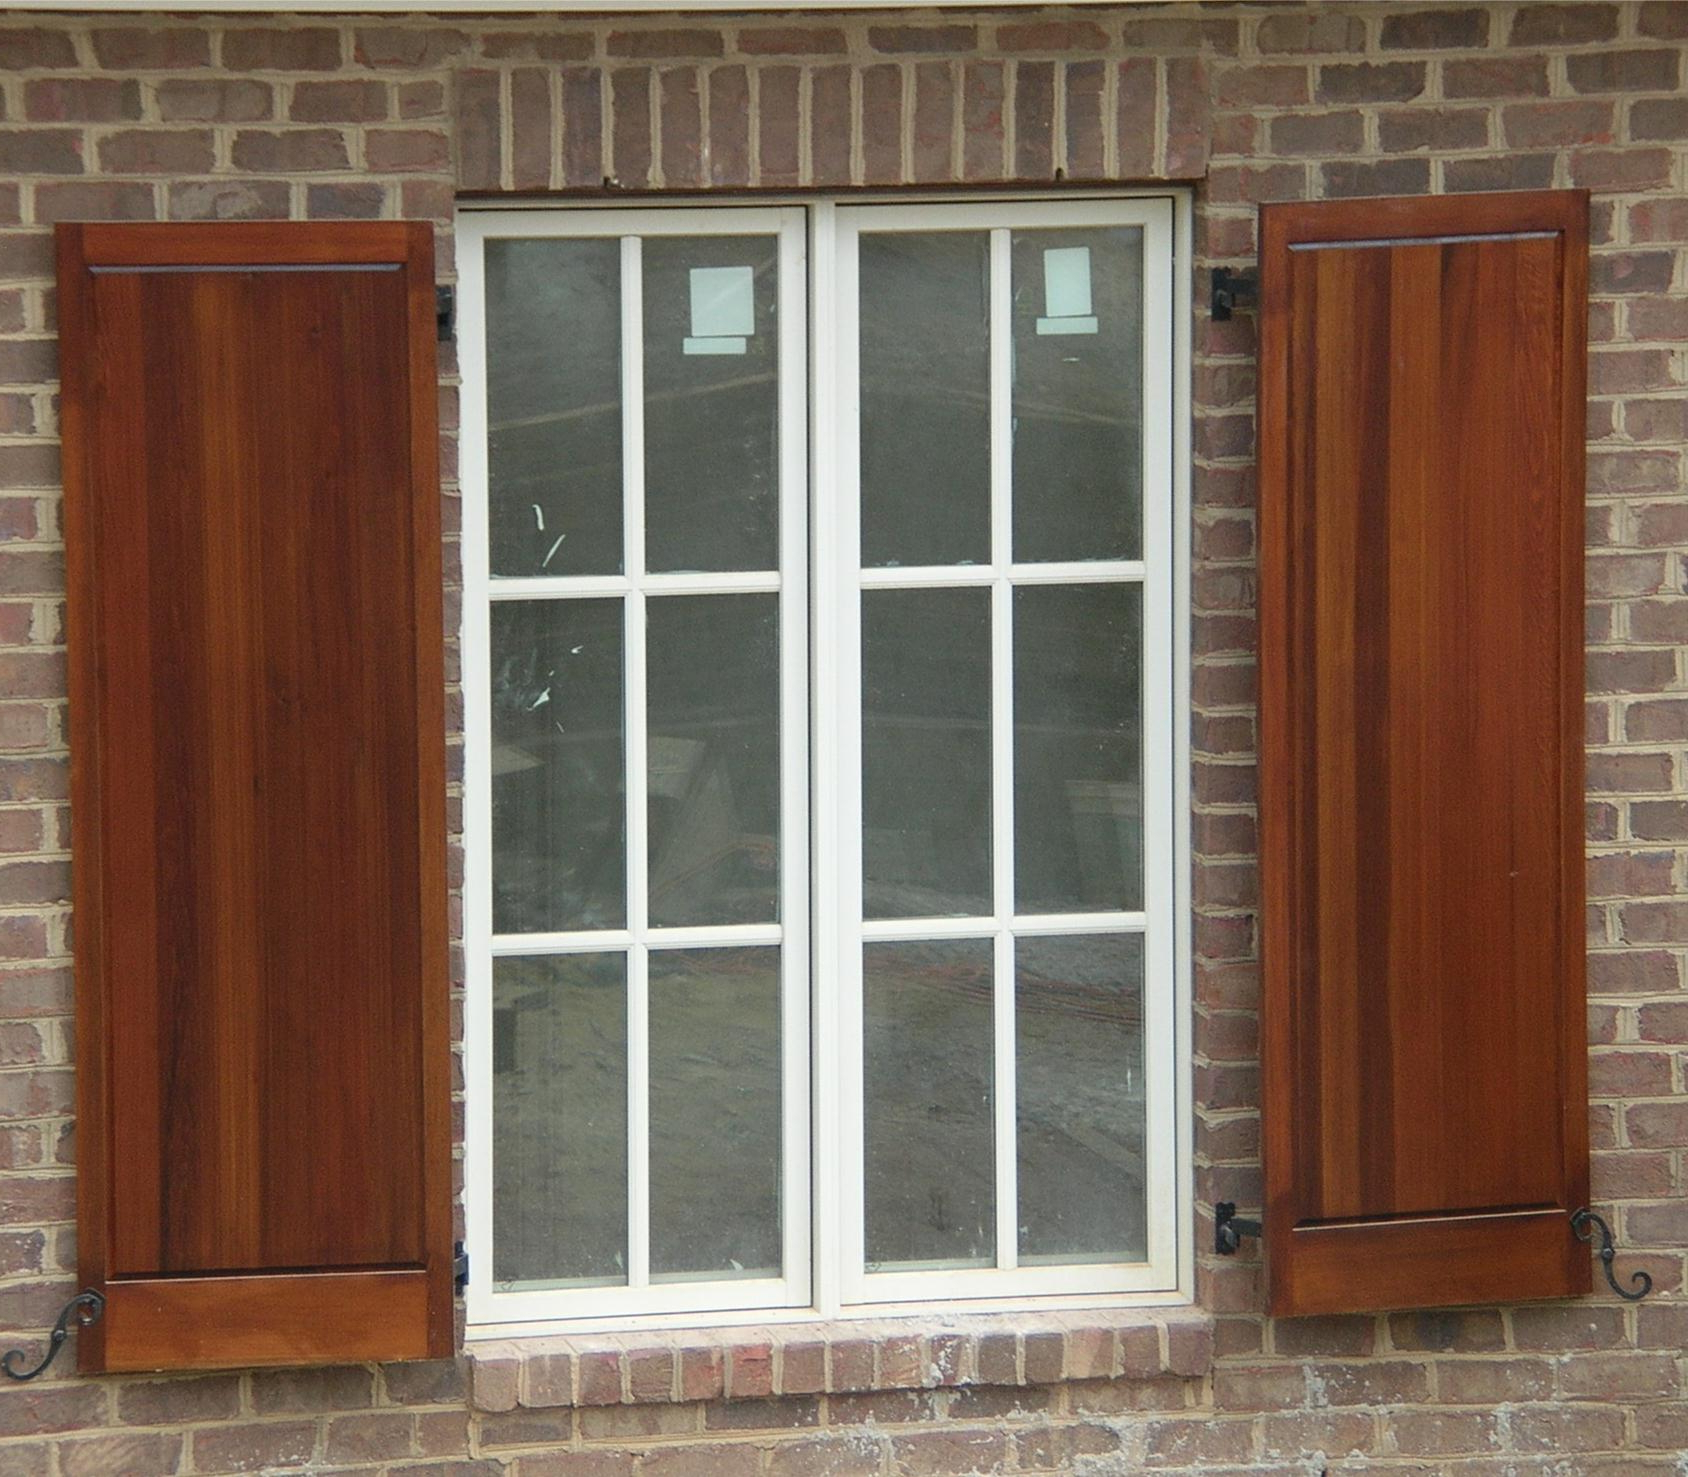 Wonderful Exterior Window Shutters To Enhance The